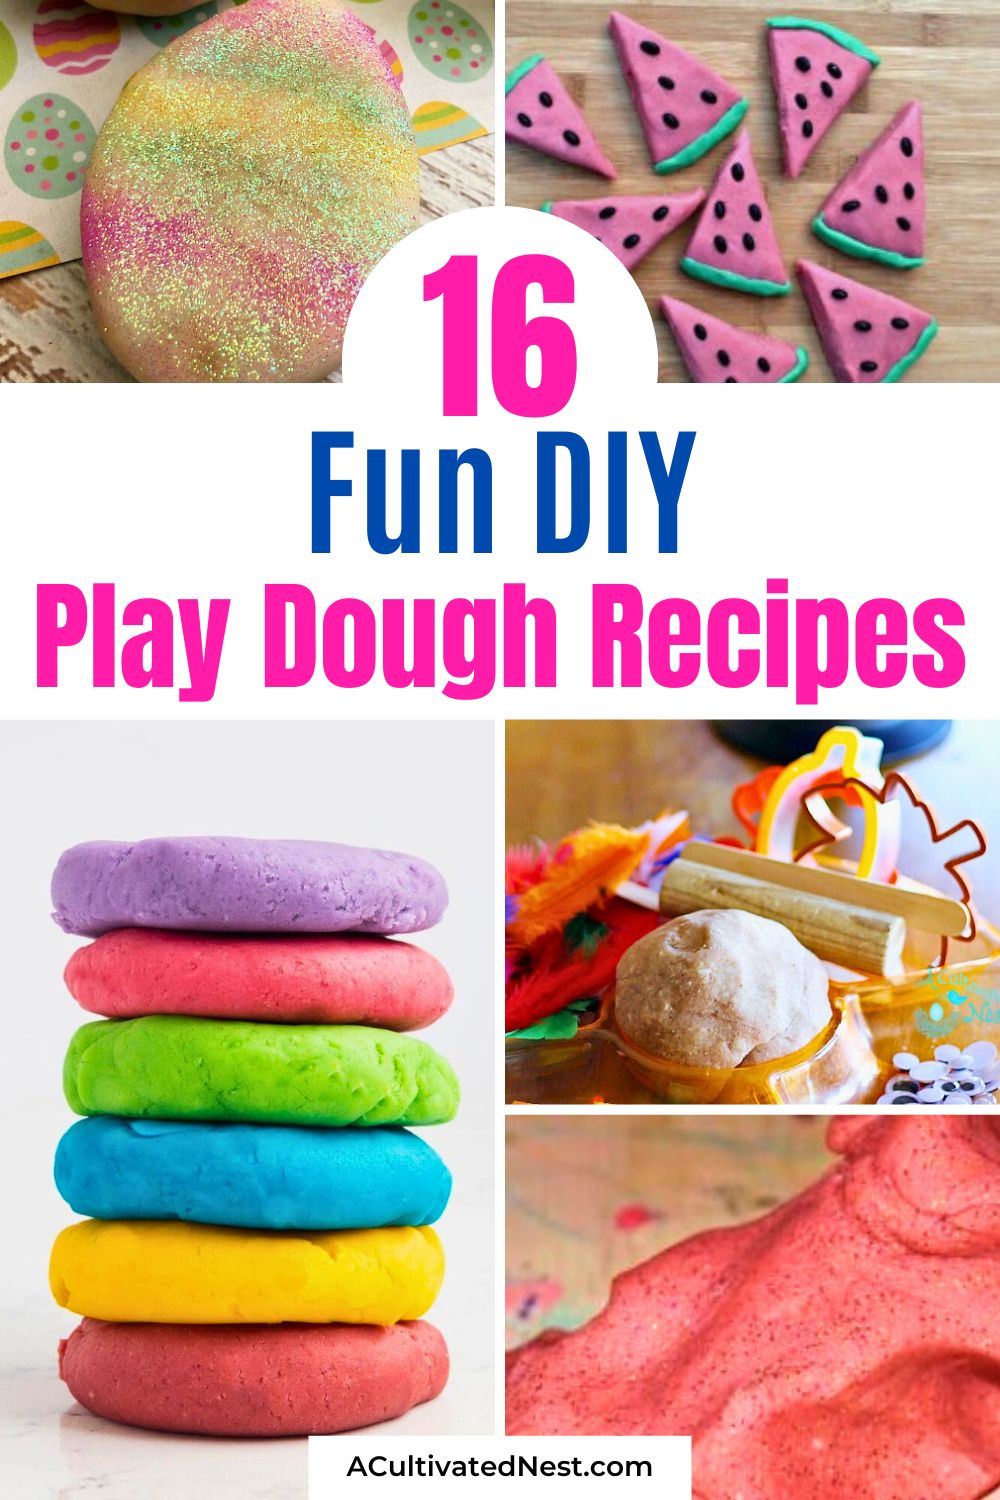 16 Fun DIY Play Doughs for Kids- Looking for a fun indoor activity? Try these DIY play doughs that kids will love! Safe, colorful, and easy to make at home, these recipes are perfect for endless hours of creative fun. | #HomemadePlayDough #KidsActivities #DIYProjects #kidsCrafts #ACultivatedNest